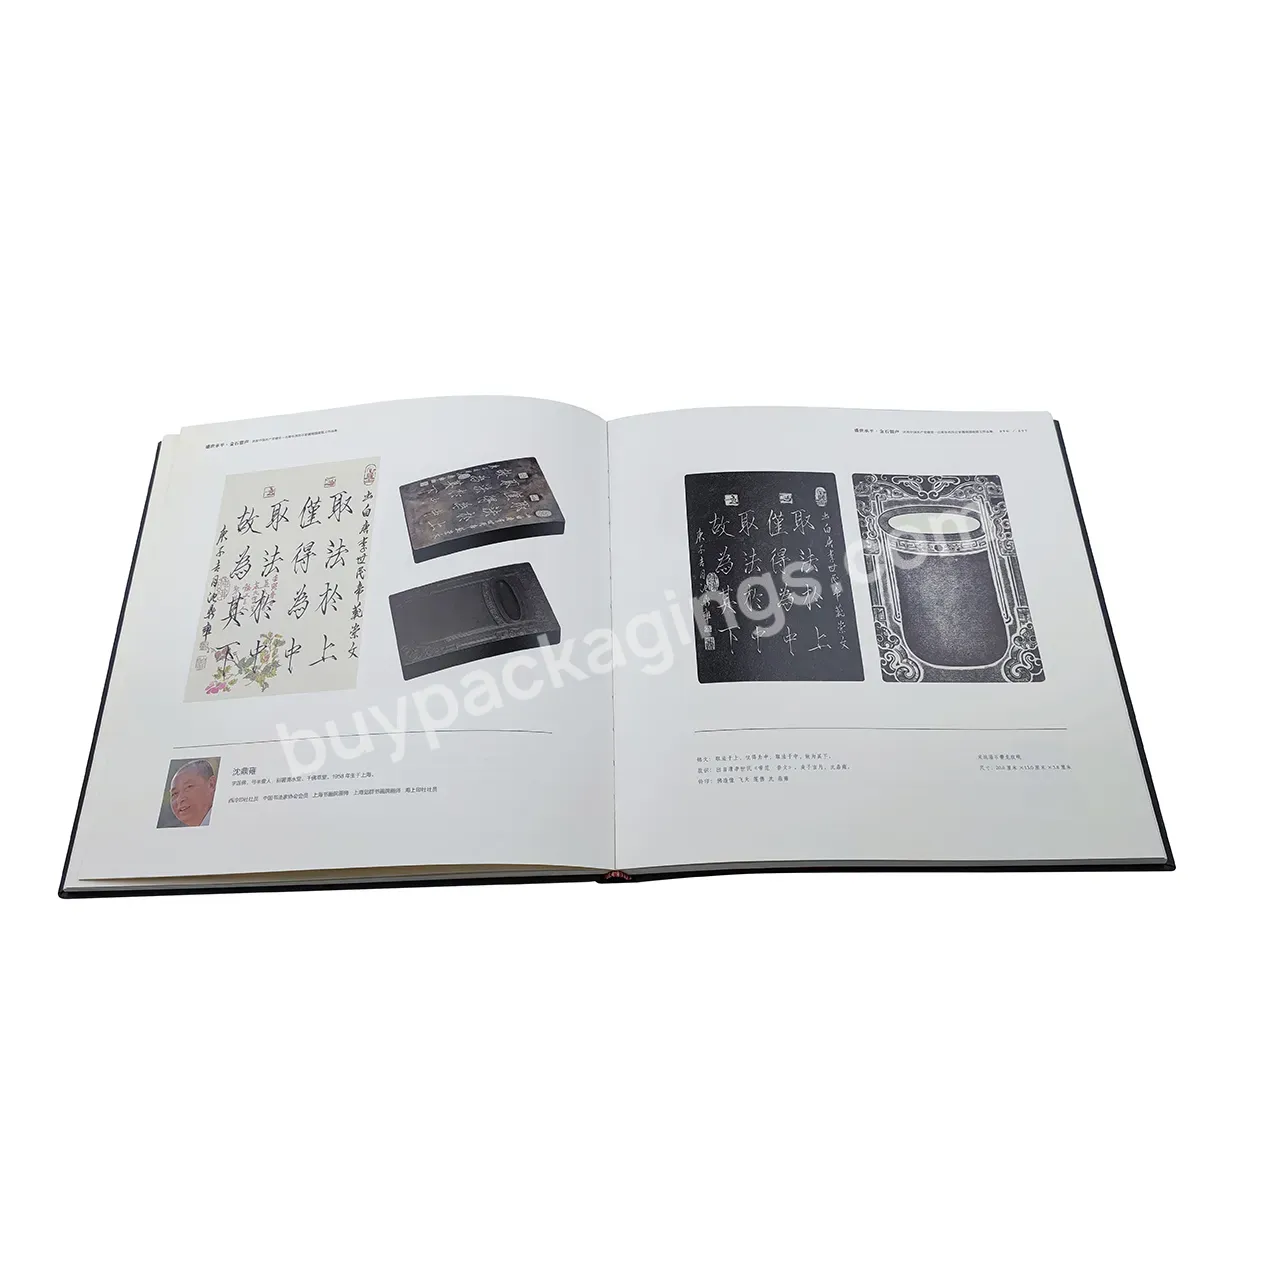 Factory Sale Various Widely Used High Quality Hardcover Photo Book Printing Hardcover Embossed Book Print - Buy High Quality Book,Hardcover Photo Book,Embossed Printing Hardcover.